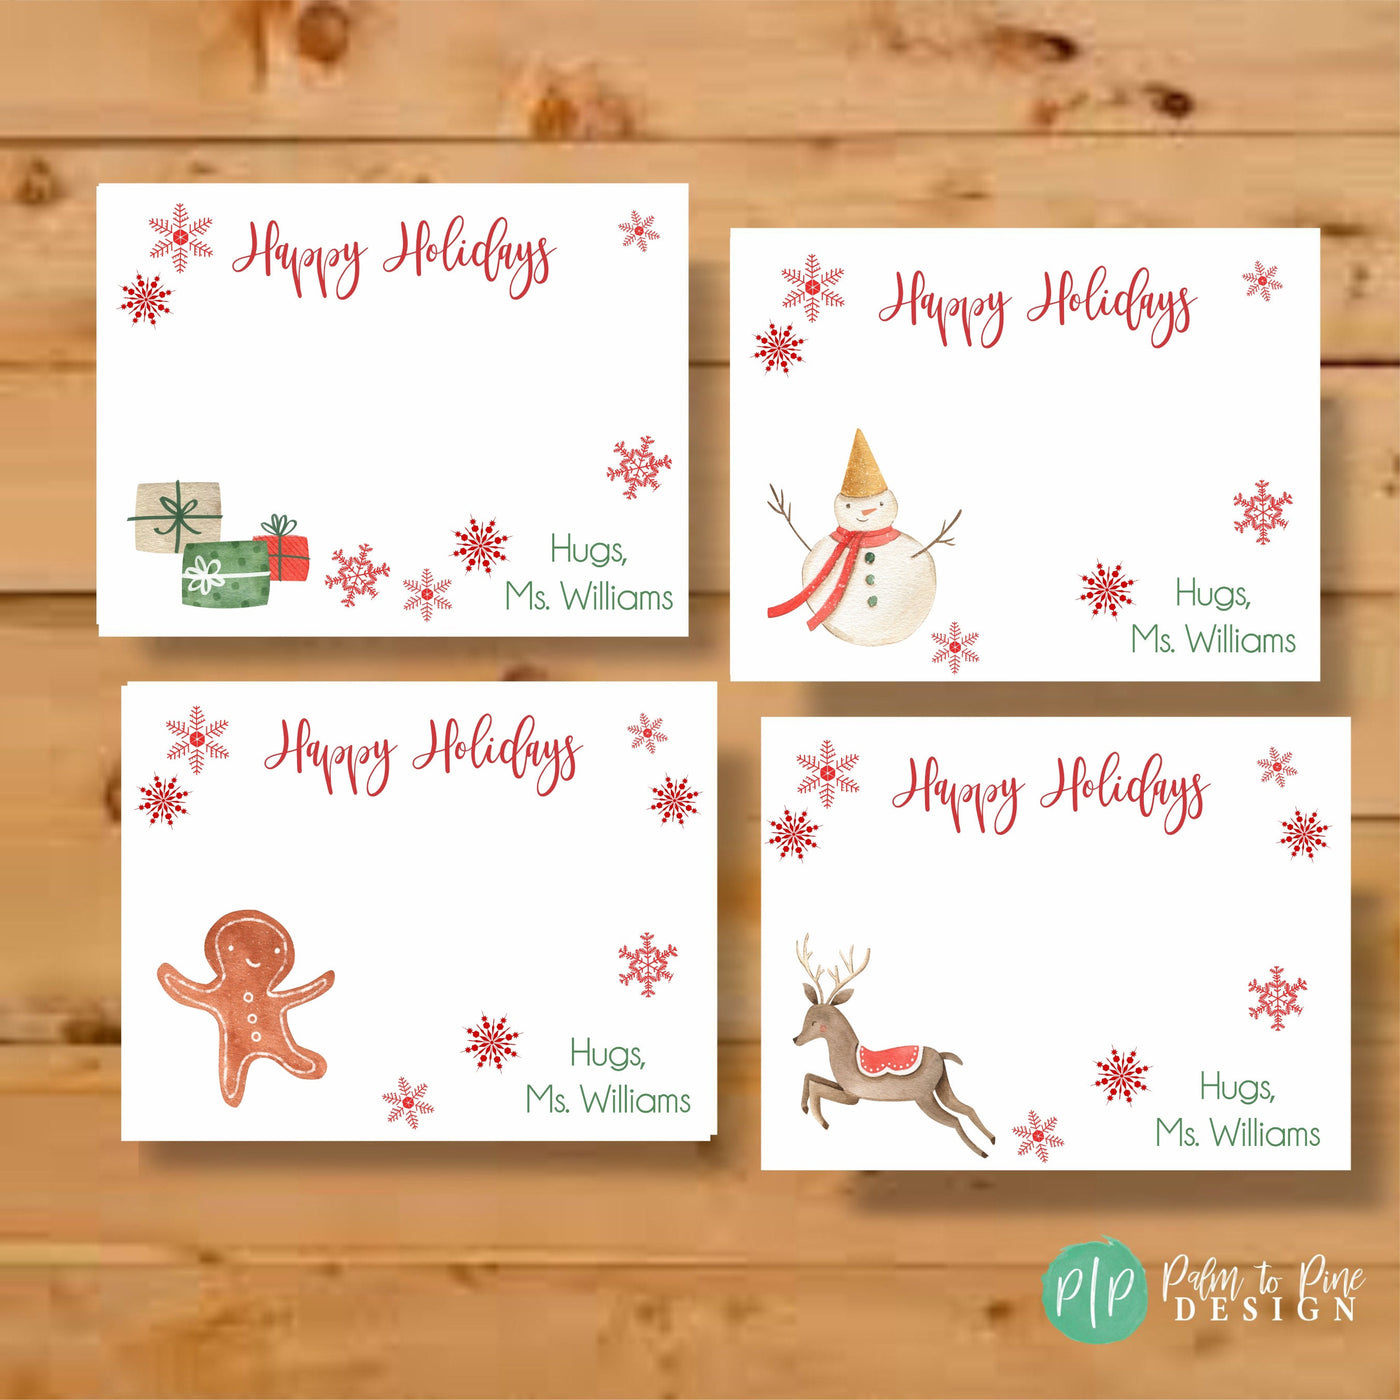 Personalized Holiday Stationery, Holiday Thank You Cards, Christmas Stationary Cards, Teacher Stationary, Custom Stationary for Teachers